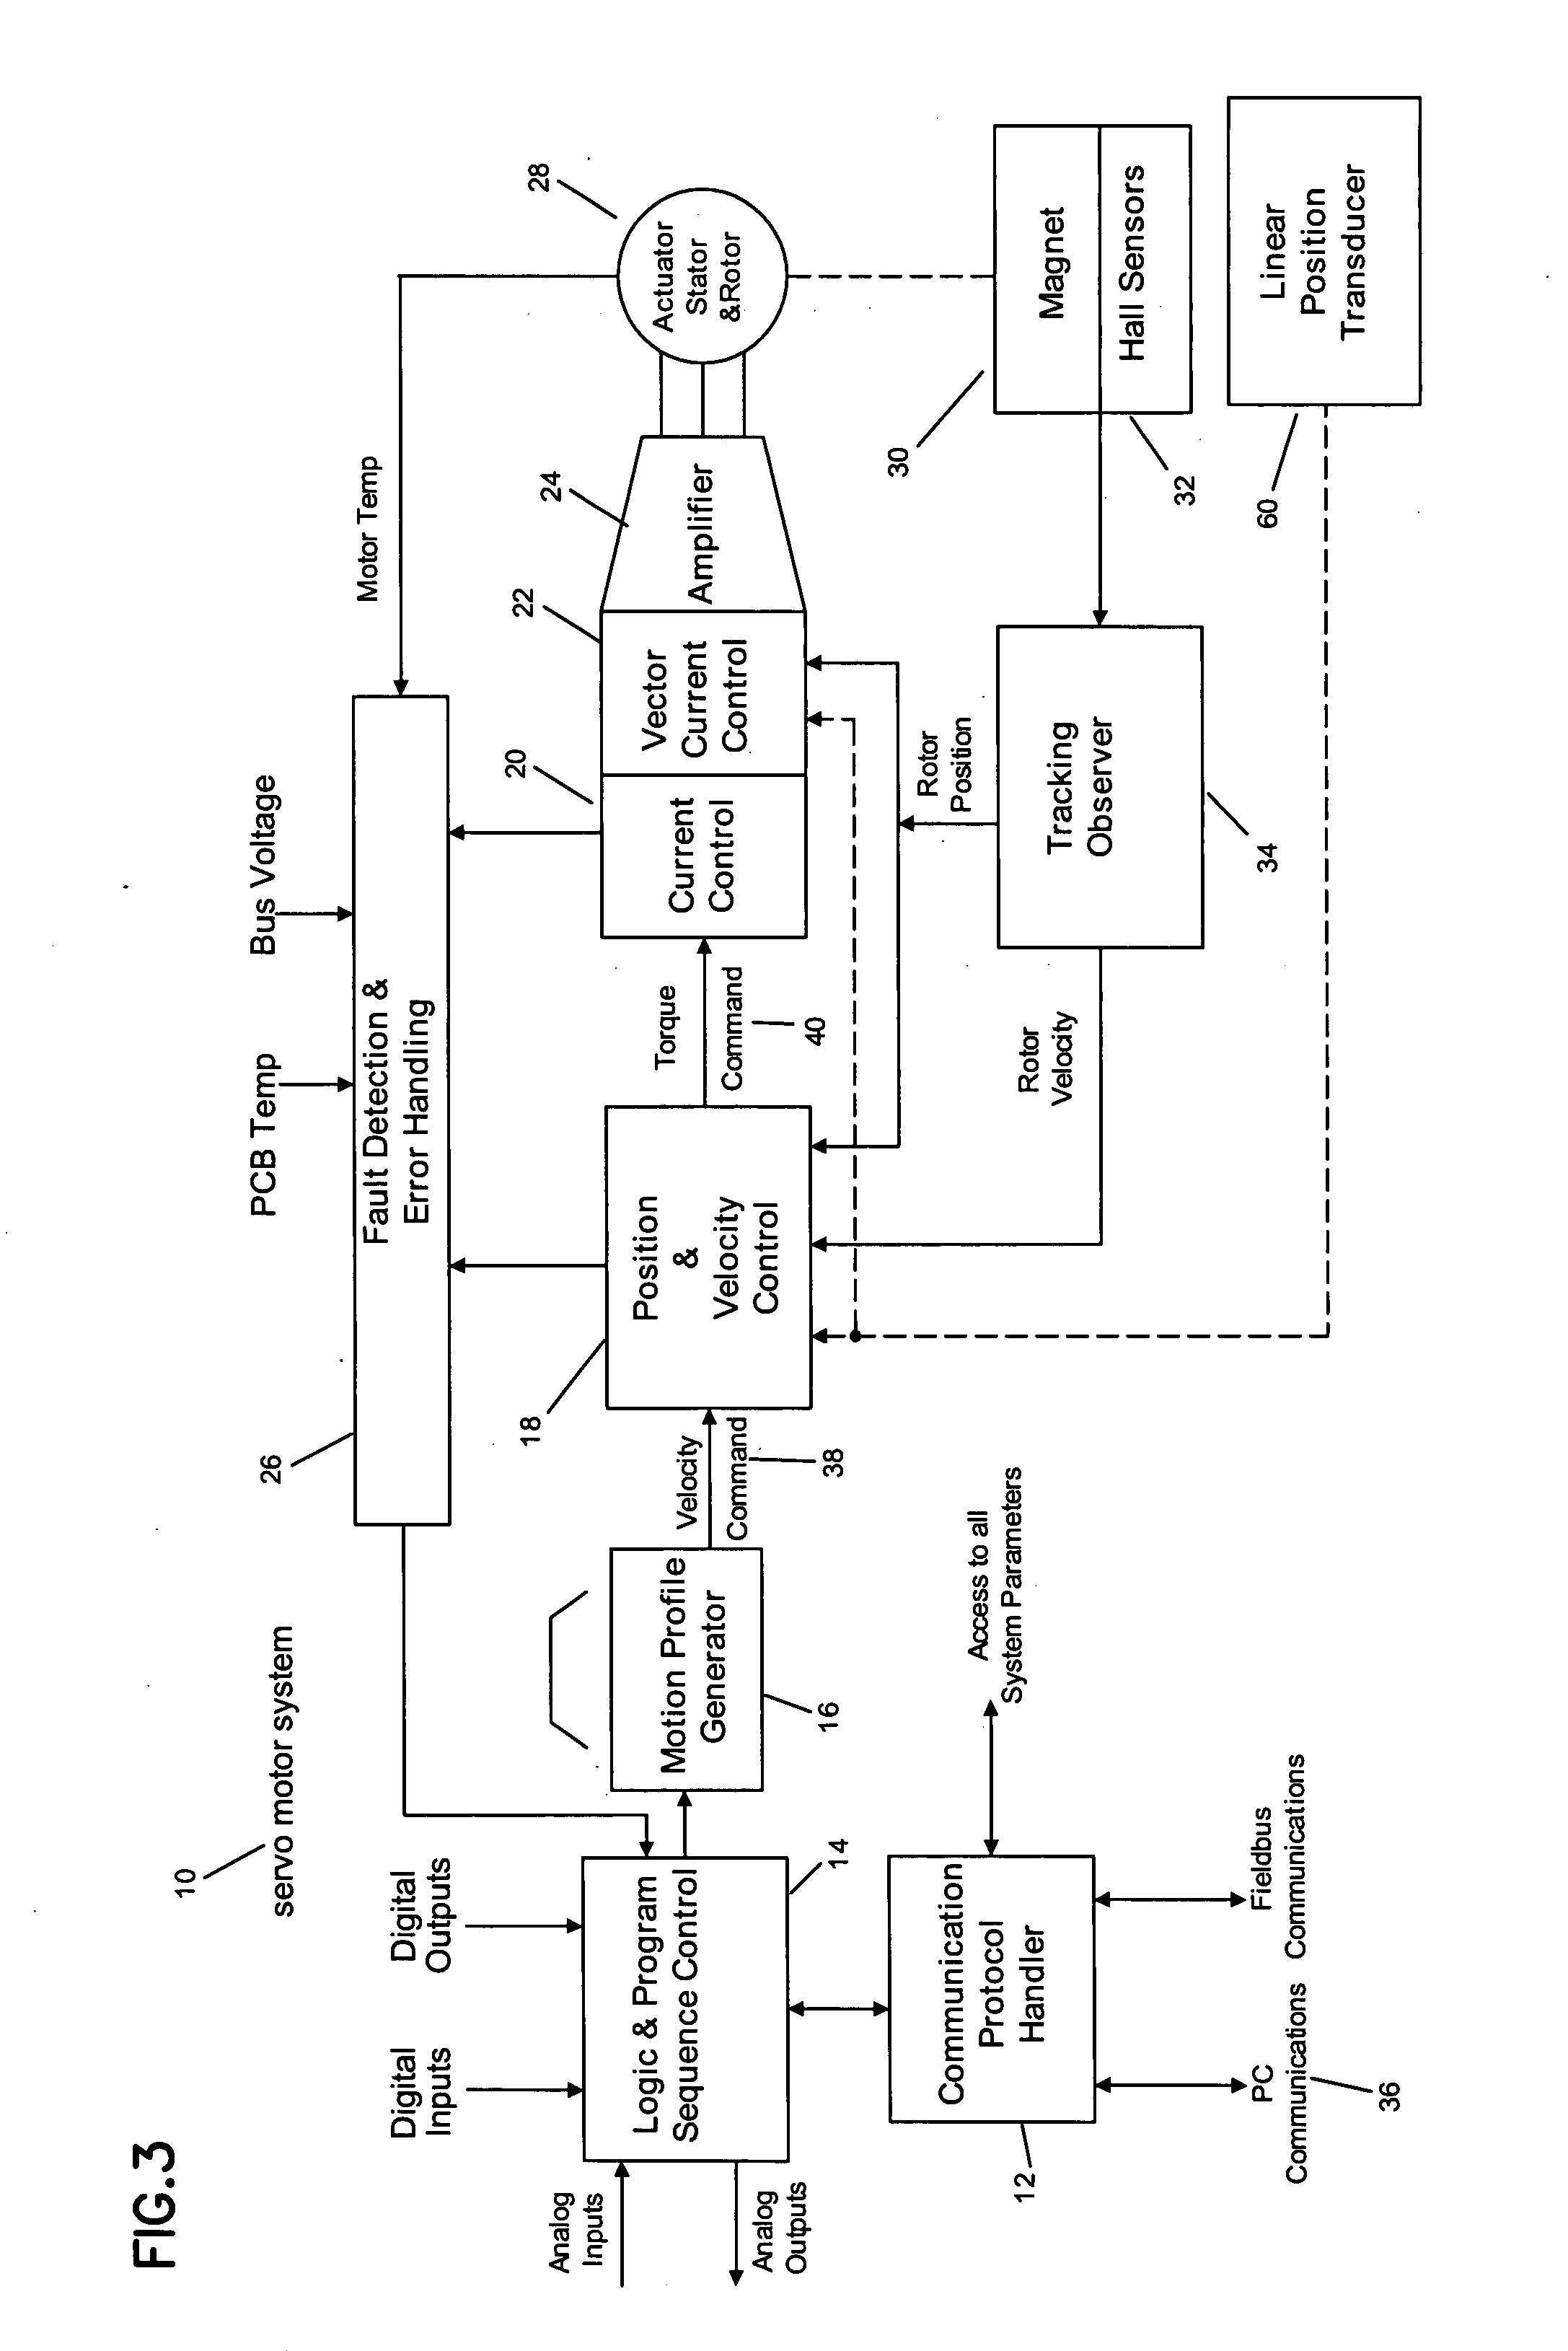 Method and apparatus for utilizing commutation sensors for speed and position control